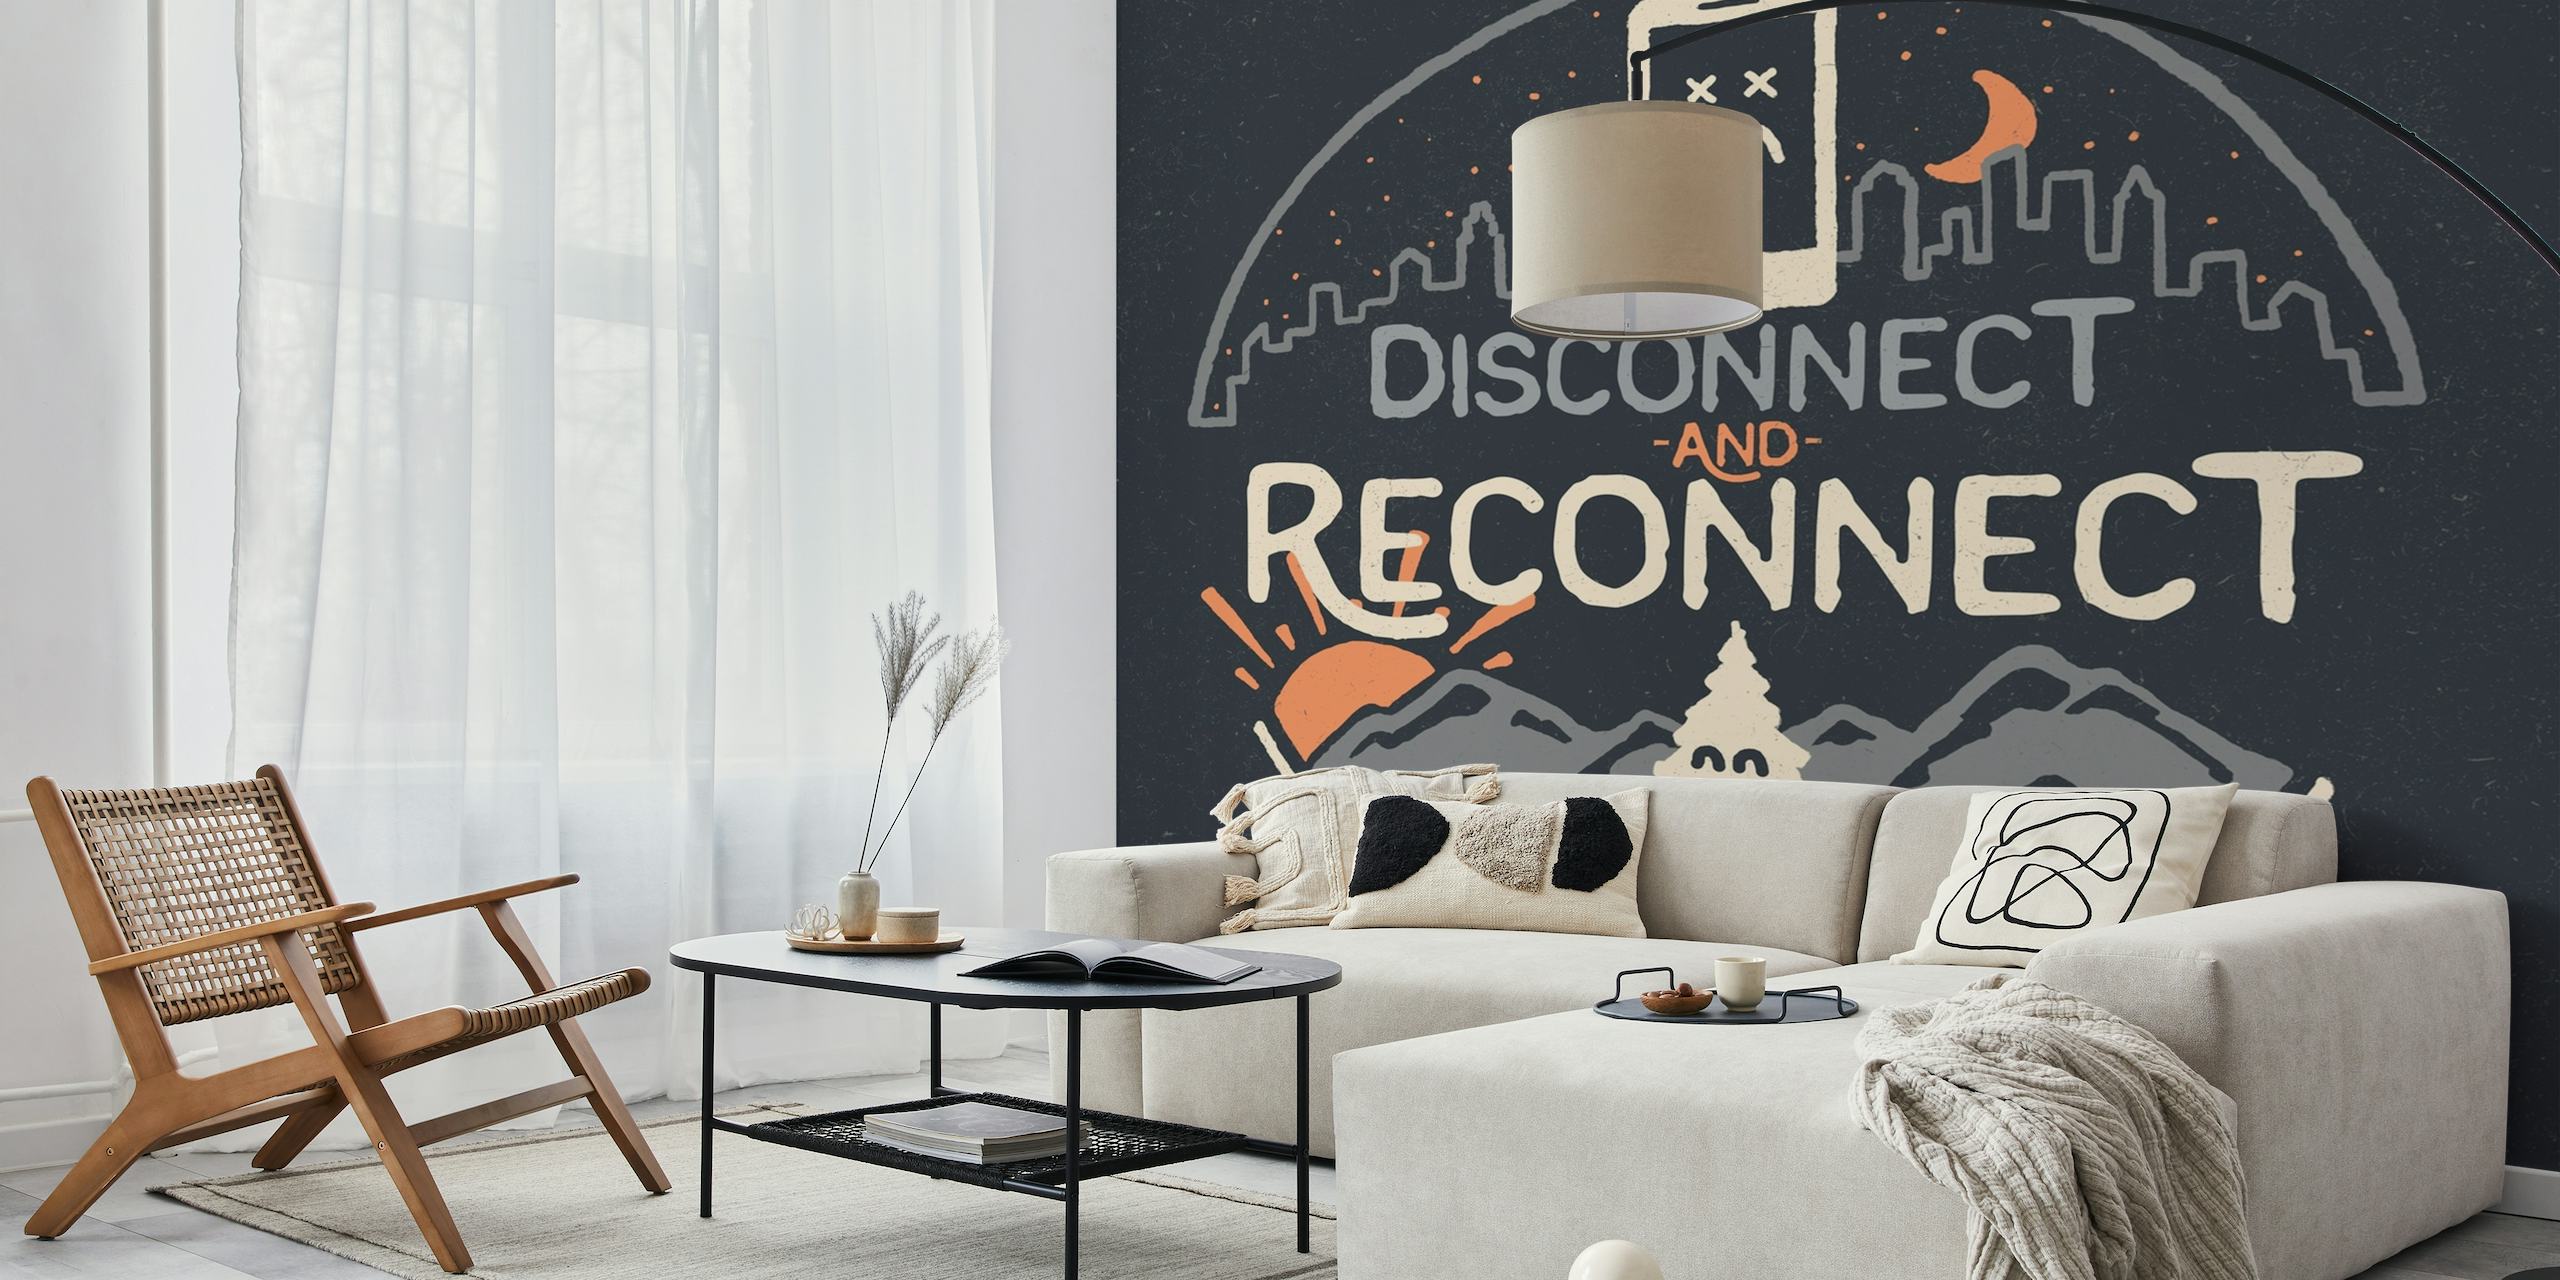 Reconnect wall mural featuring mountains, trees, and a moon, symbolizing a digital detox and return to nature.